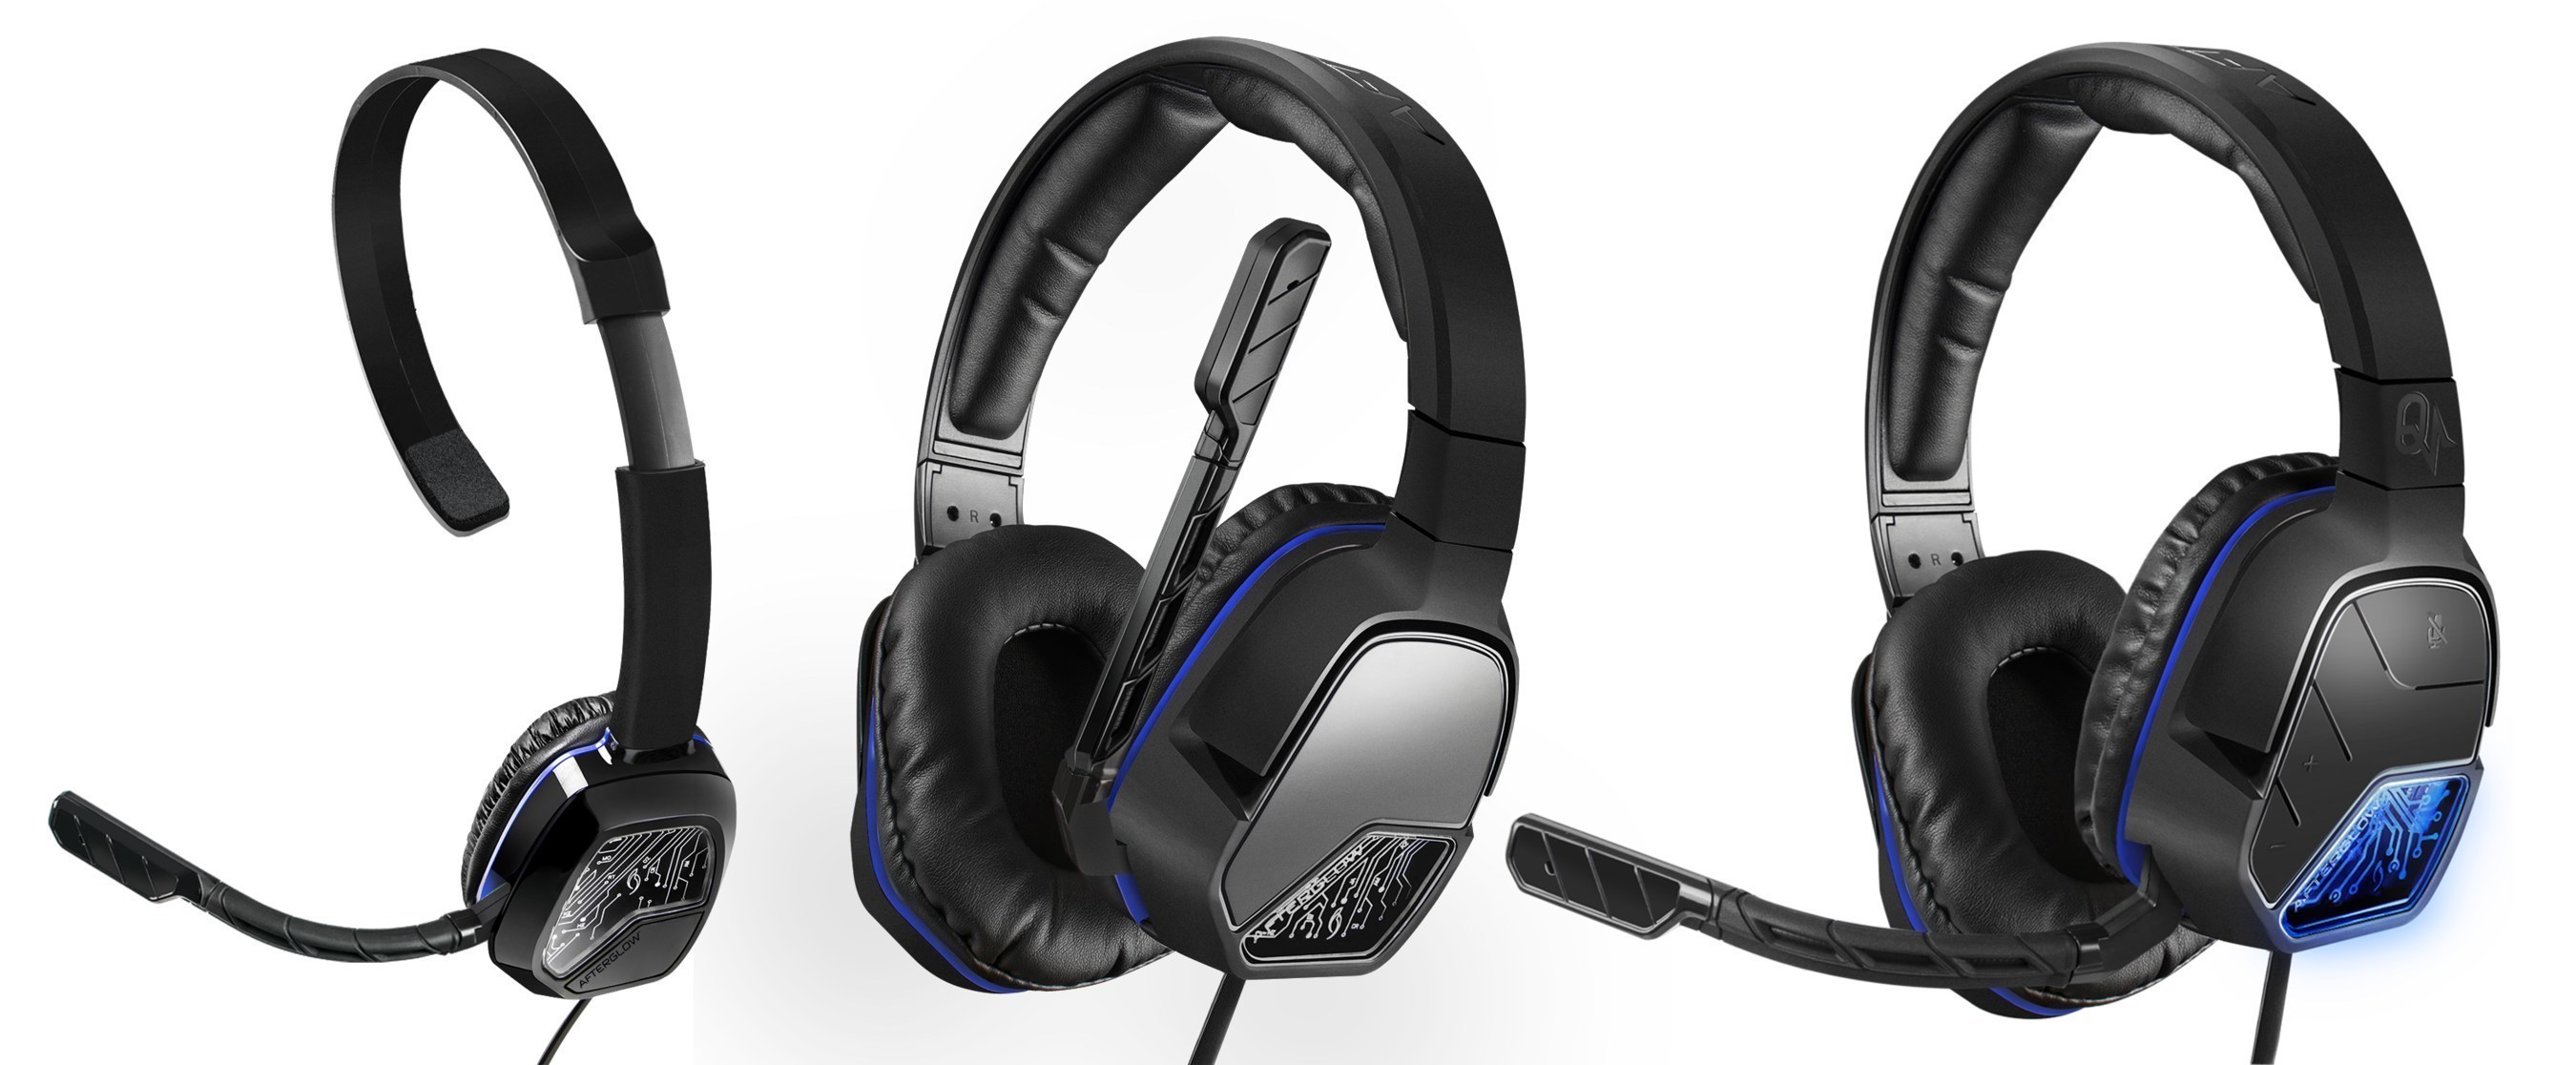 New LVL series headsets from Performance Designed Products (PDP): LVL 1, LVL 3 and LVL 5 for PlayStation 4.